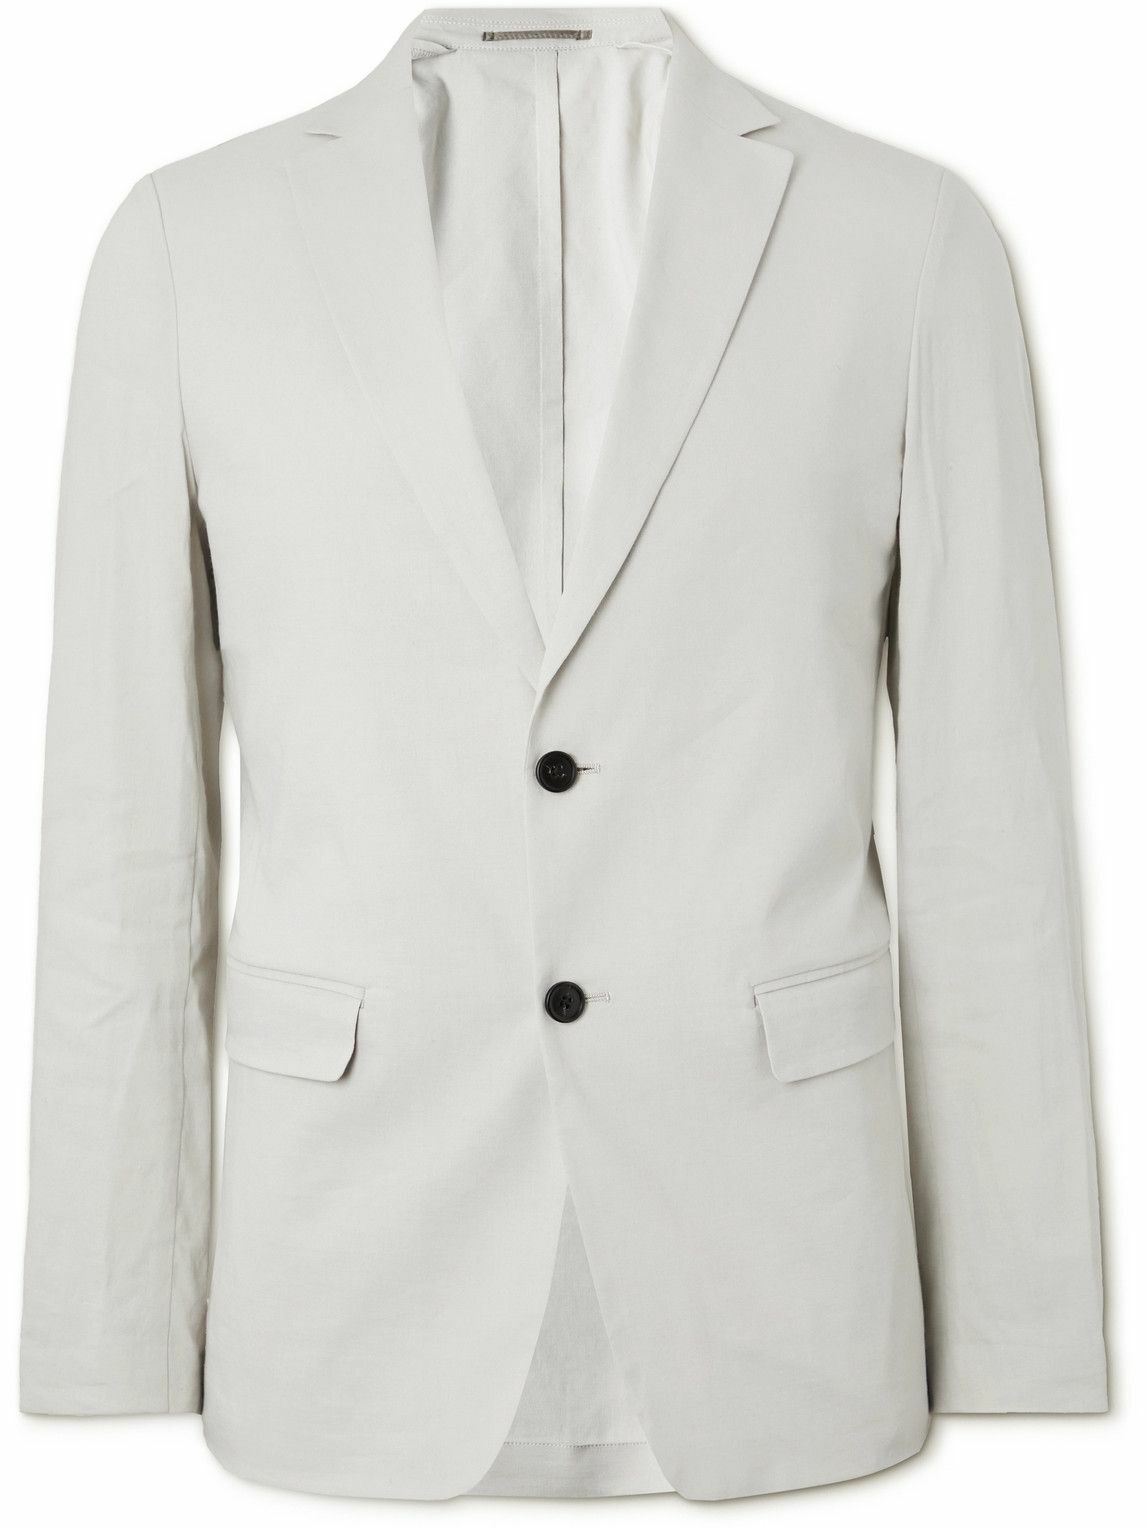 Theory - Clinton Linen-Blend Suit Jacket - Neutrals Theory